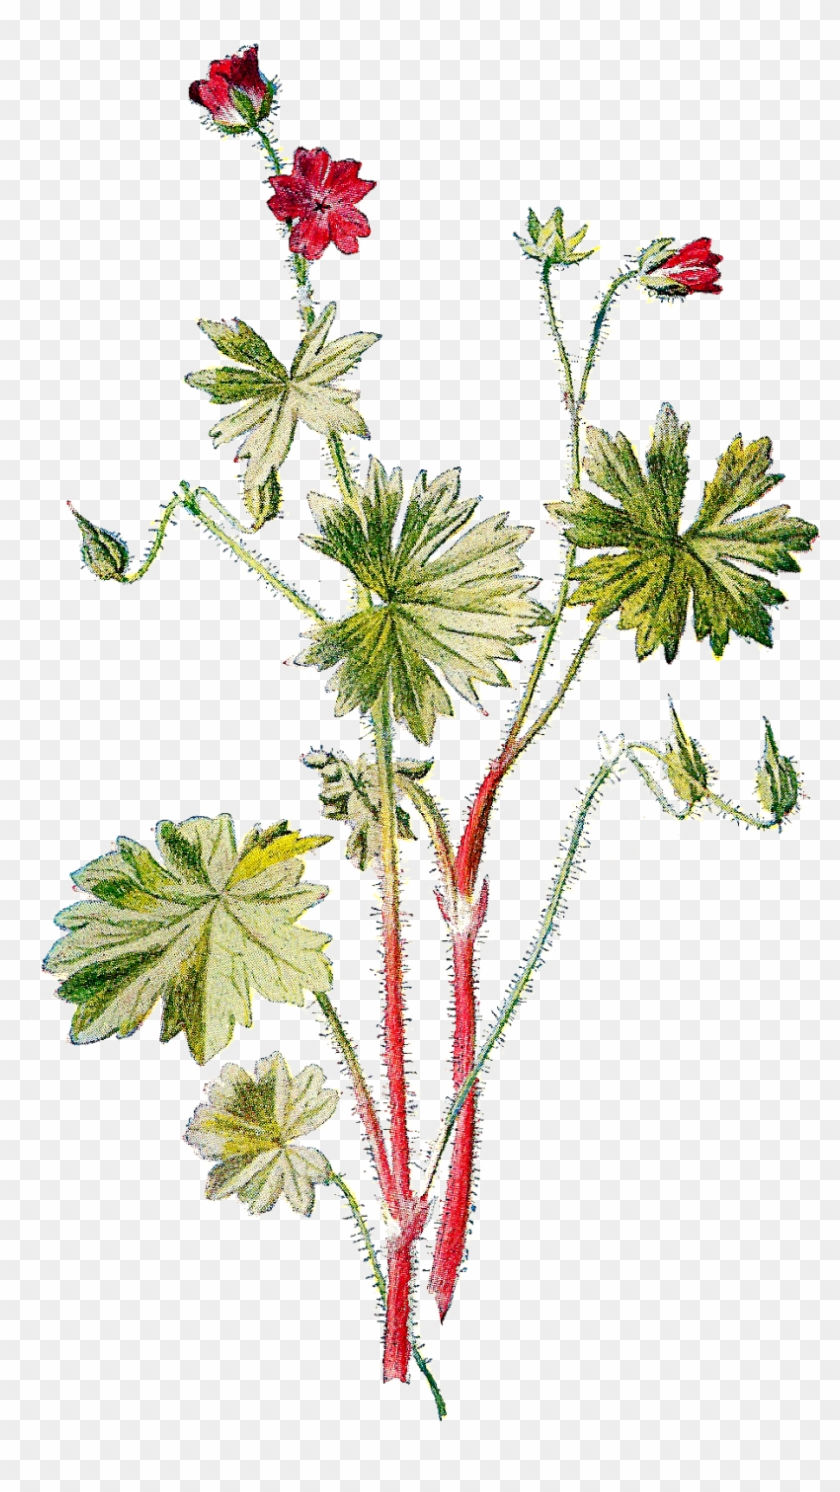 This Is A Pretty Digital Flower Download Of The Wildflower, - Dove's-foot Crane's-bill #658092